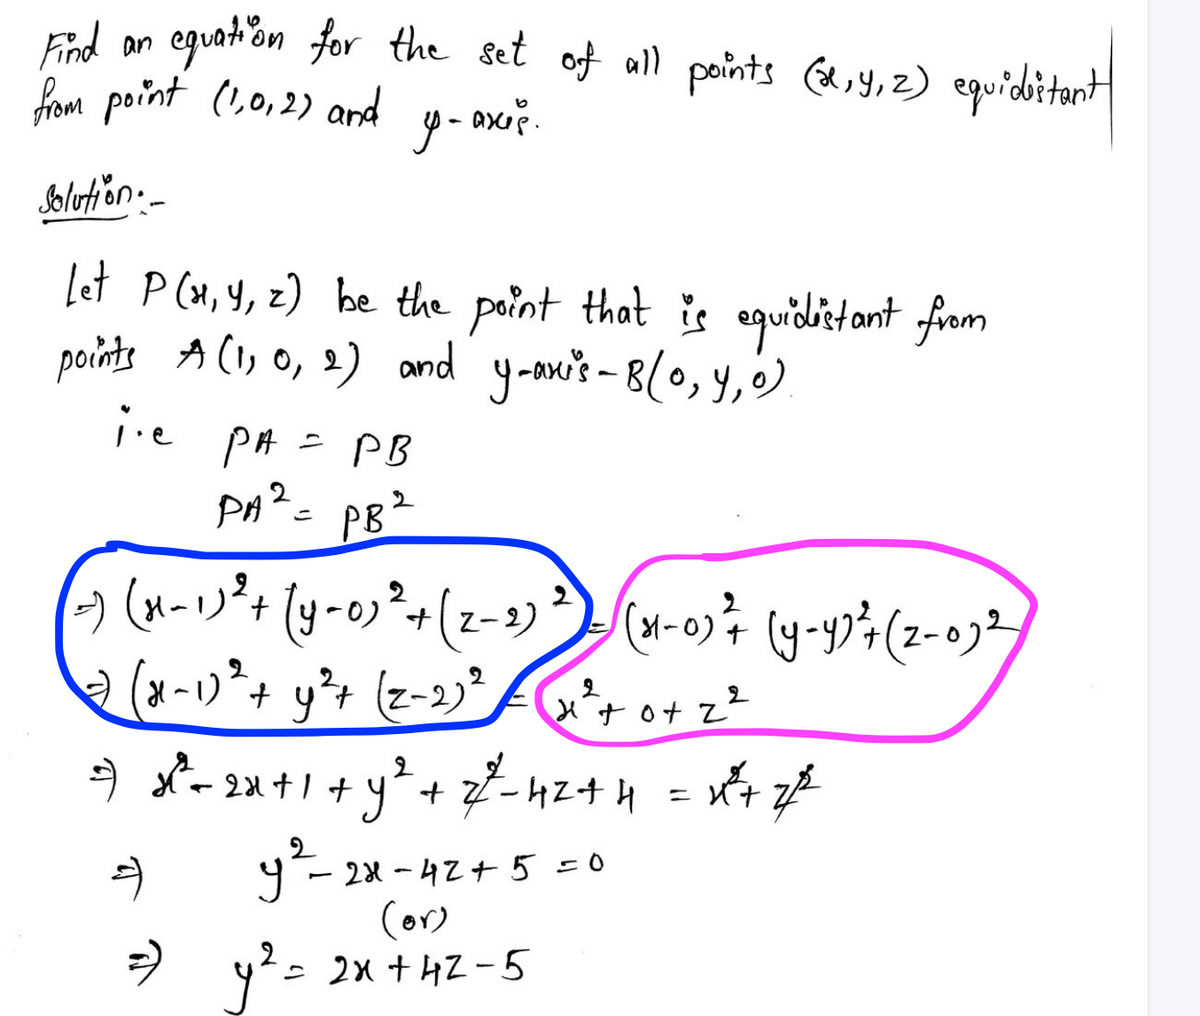 Find an eguation for the set of all paints (l,y,z) equiditant
from point (1,0,2) and
Jolution:-
let P (n, Y, z) be the paint that is equiditant firam
points A (I) O, 2) and yoon's -8(0,y,).
ie
PH = PB
PB2
(aーリ+(y-o+(z-))
(a-)** -ンto+z
PA²-
0) +z-2)
うメ-2x+1 +y+ ー4エナ4 =
ニXt
4- 28 - 42+ 5 =0
(or)
う - 2x +h4z-5
